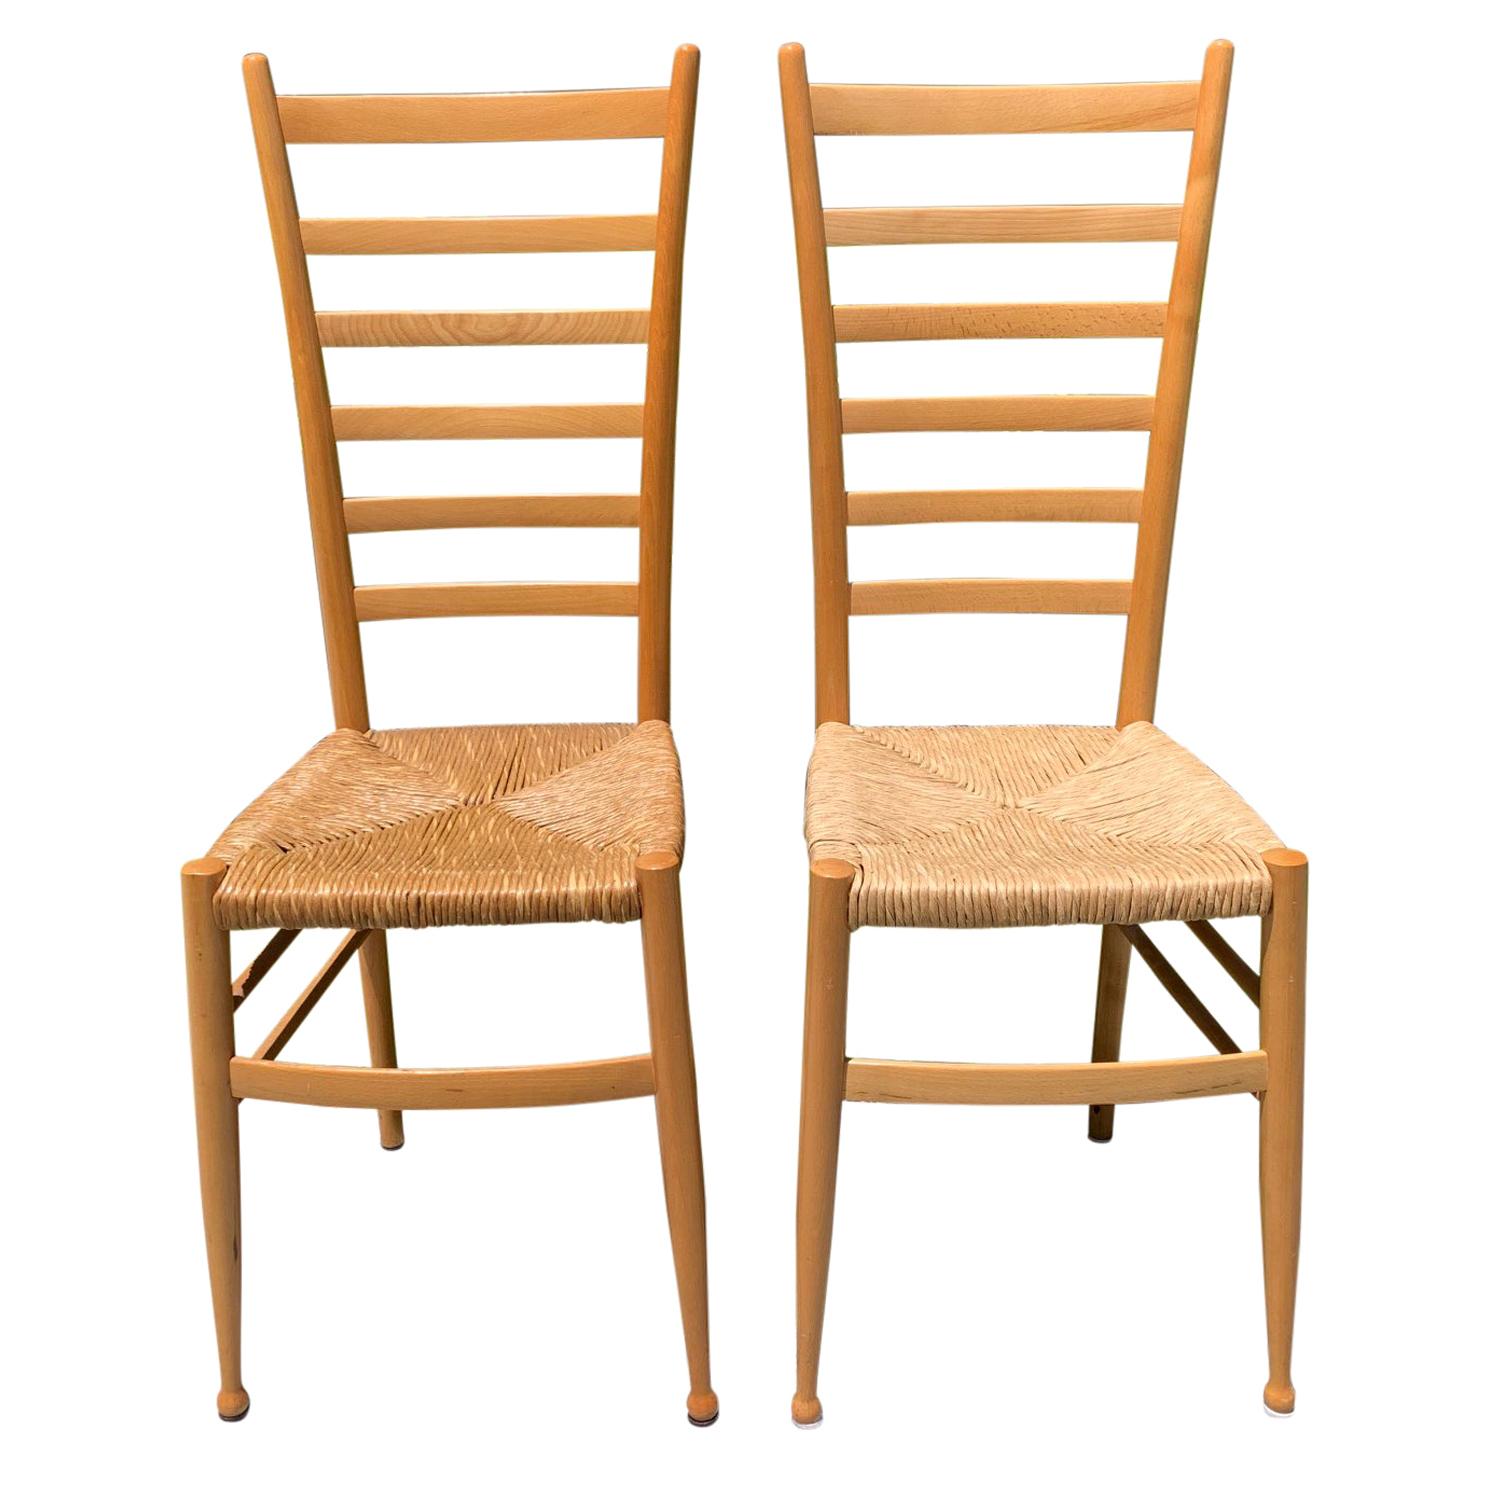 Pair of Wood Italian Ladder Back Chairs Attributed to Gio Ponti